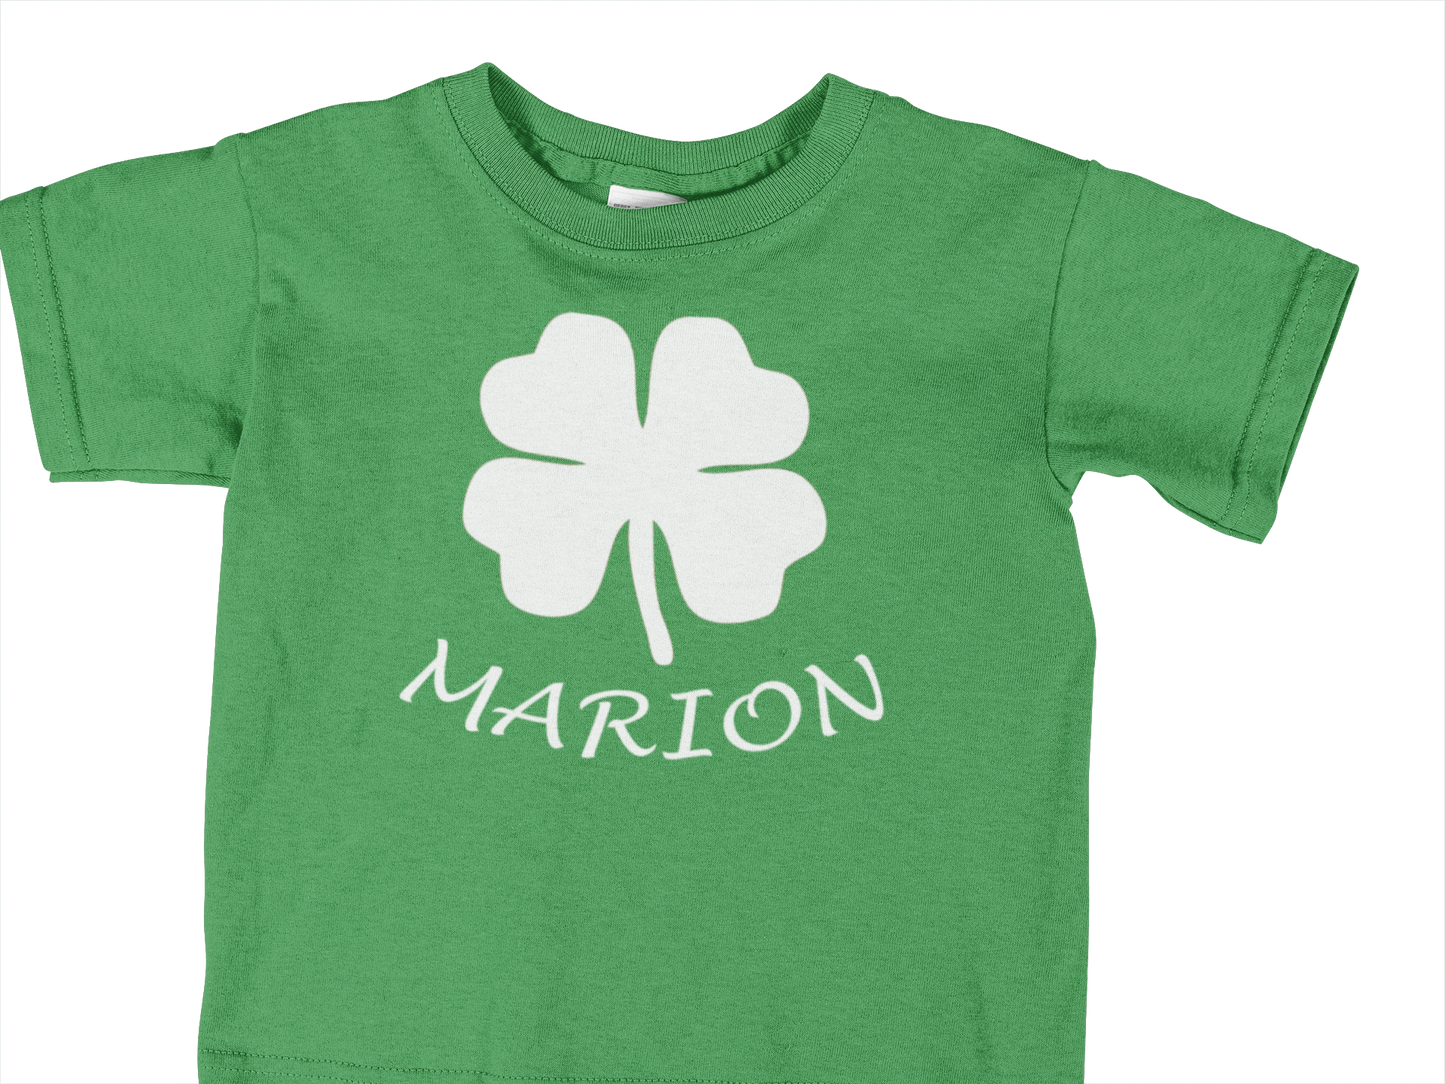 T-SHIRT - MARION ST PATRICK'S DAY